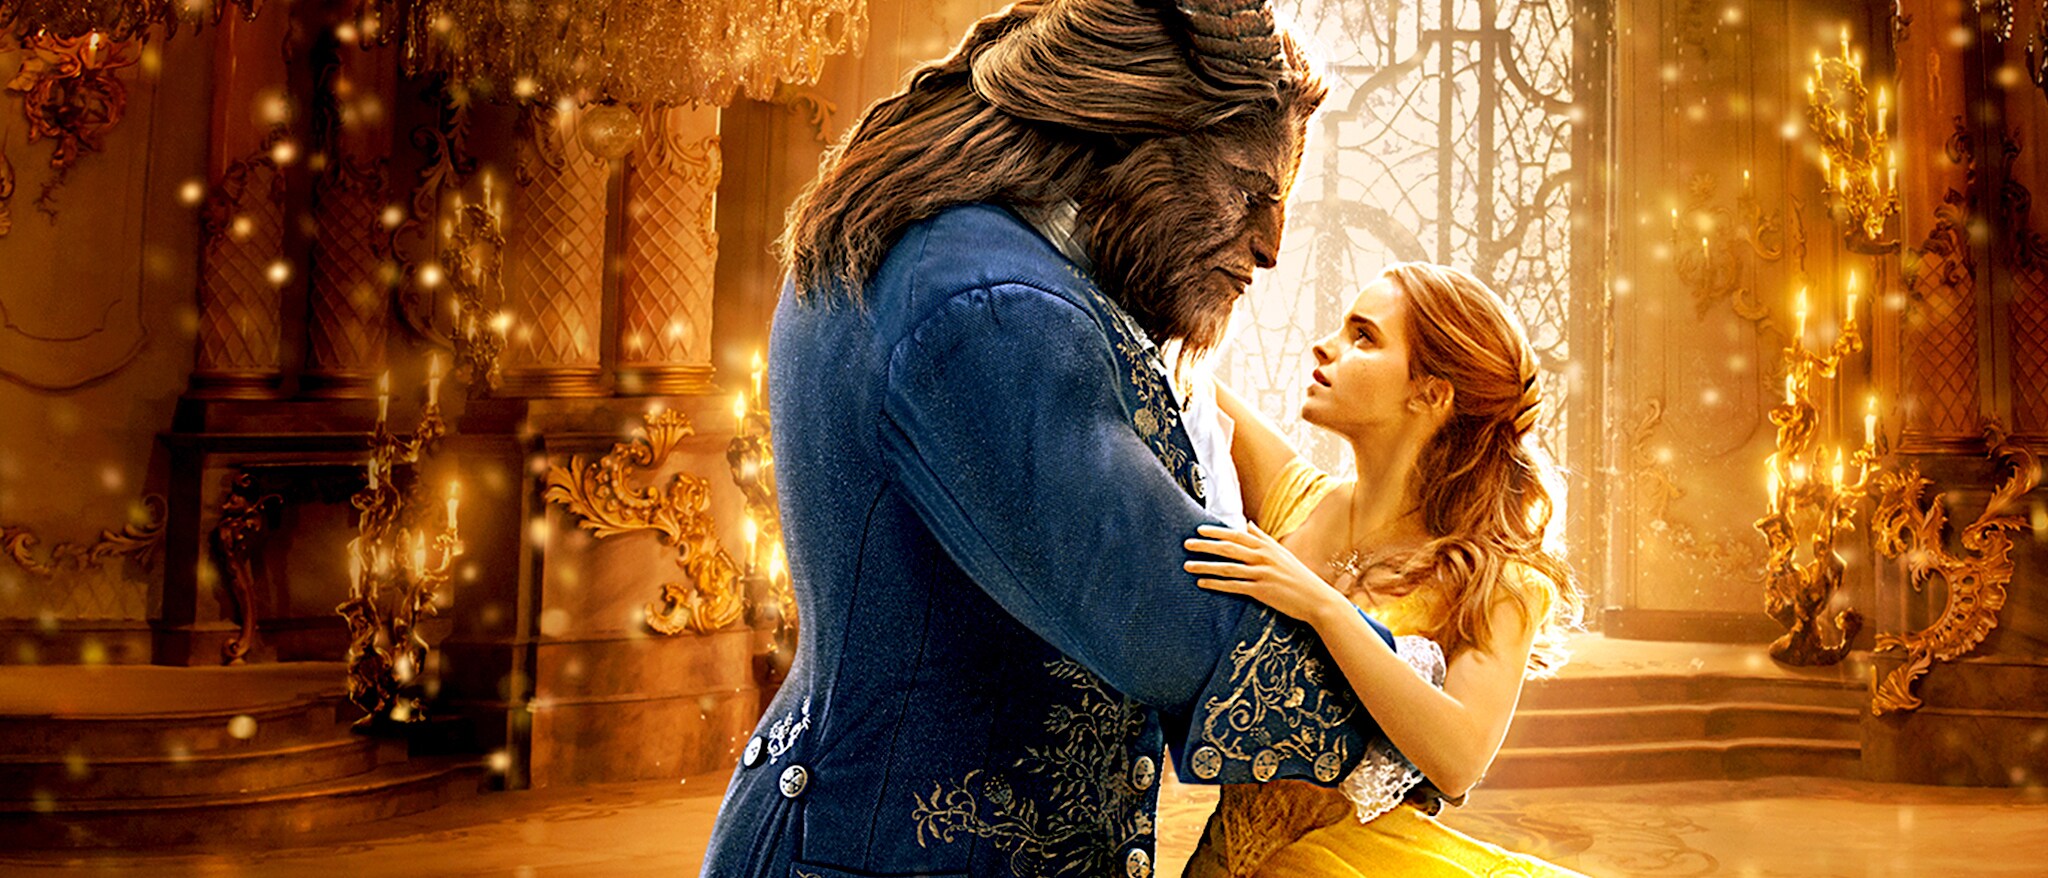 beauty and the beast real life movie